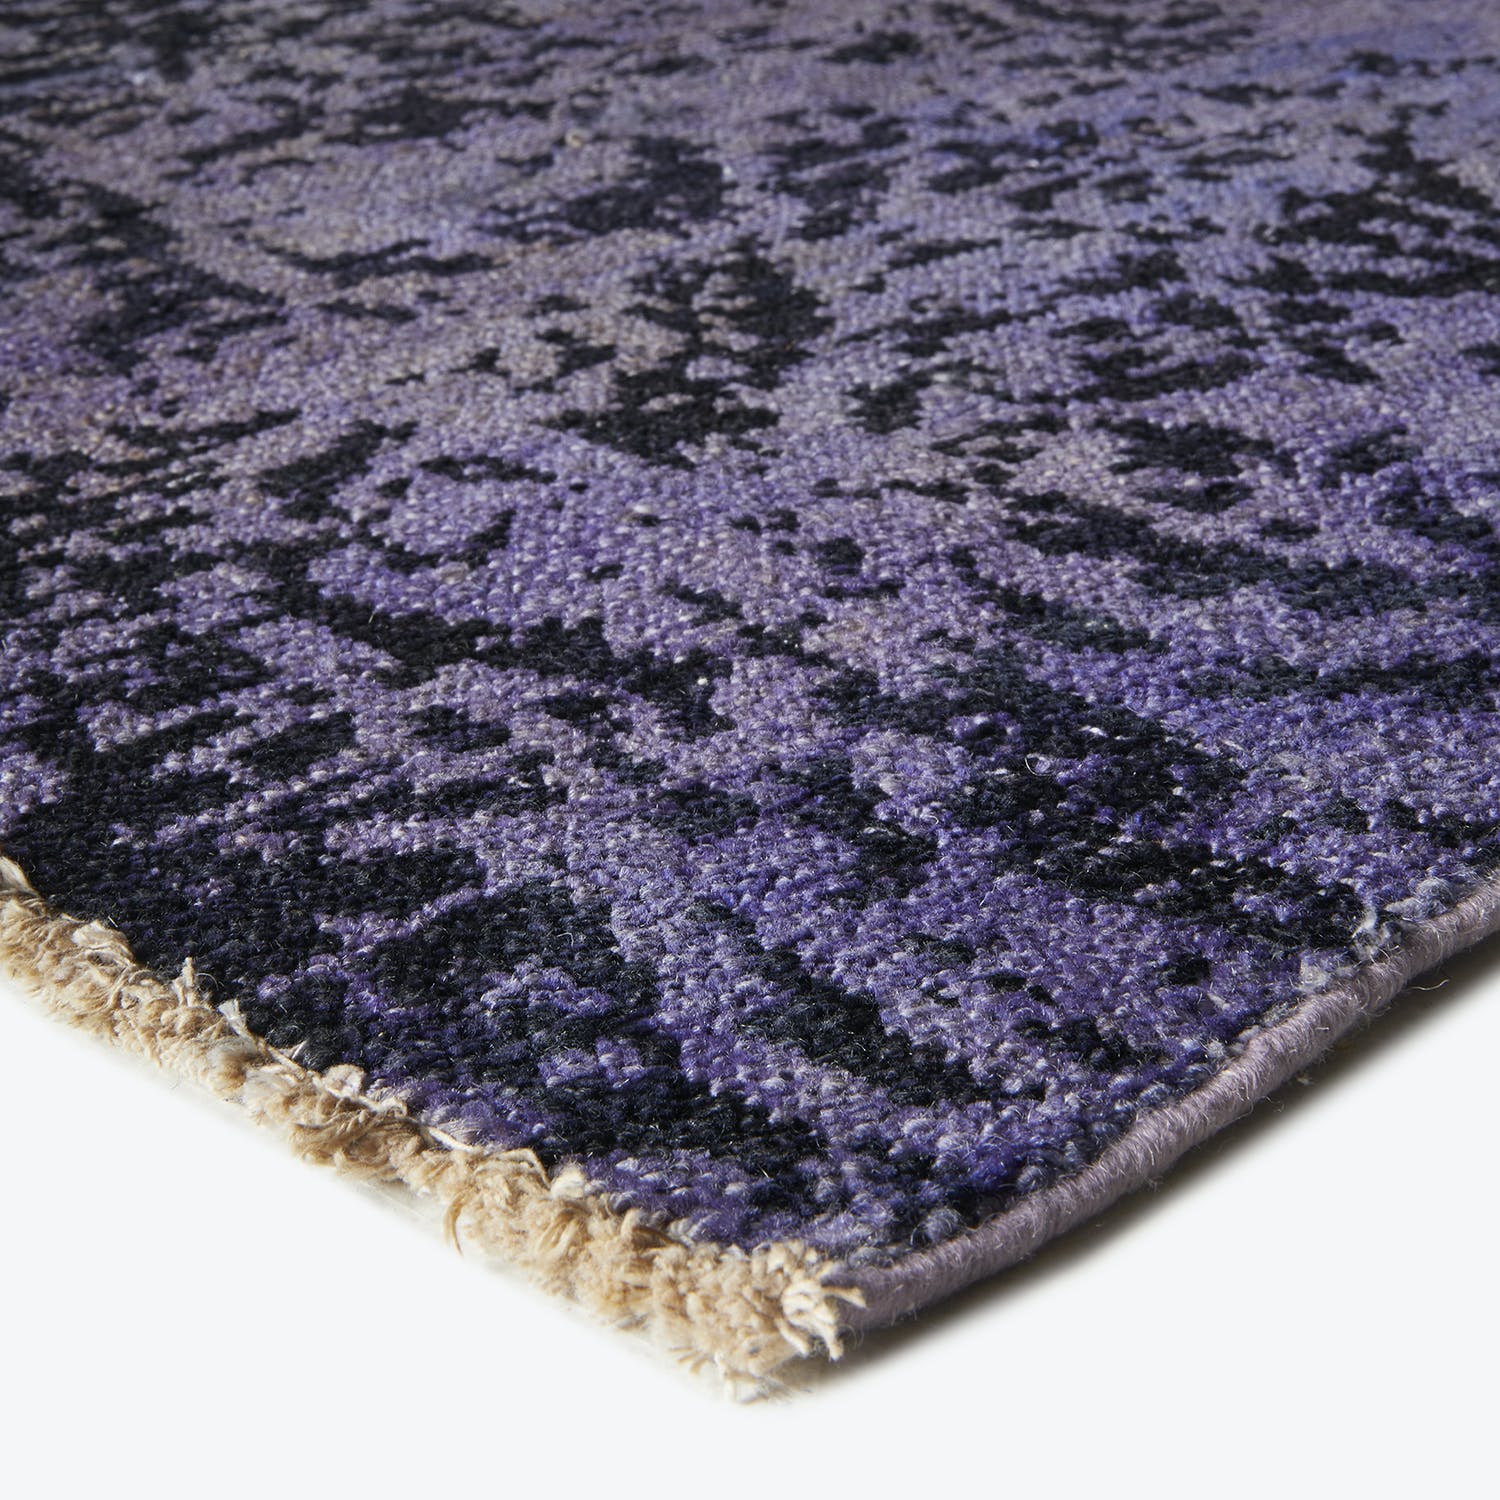 Detailed close-up of a plush purple rug with abstract design.